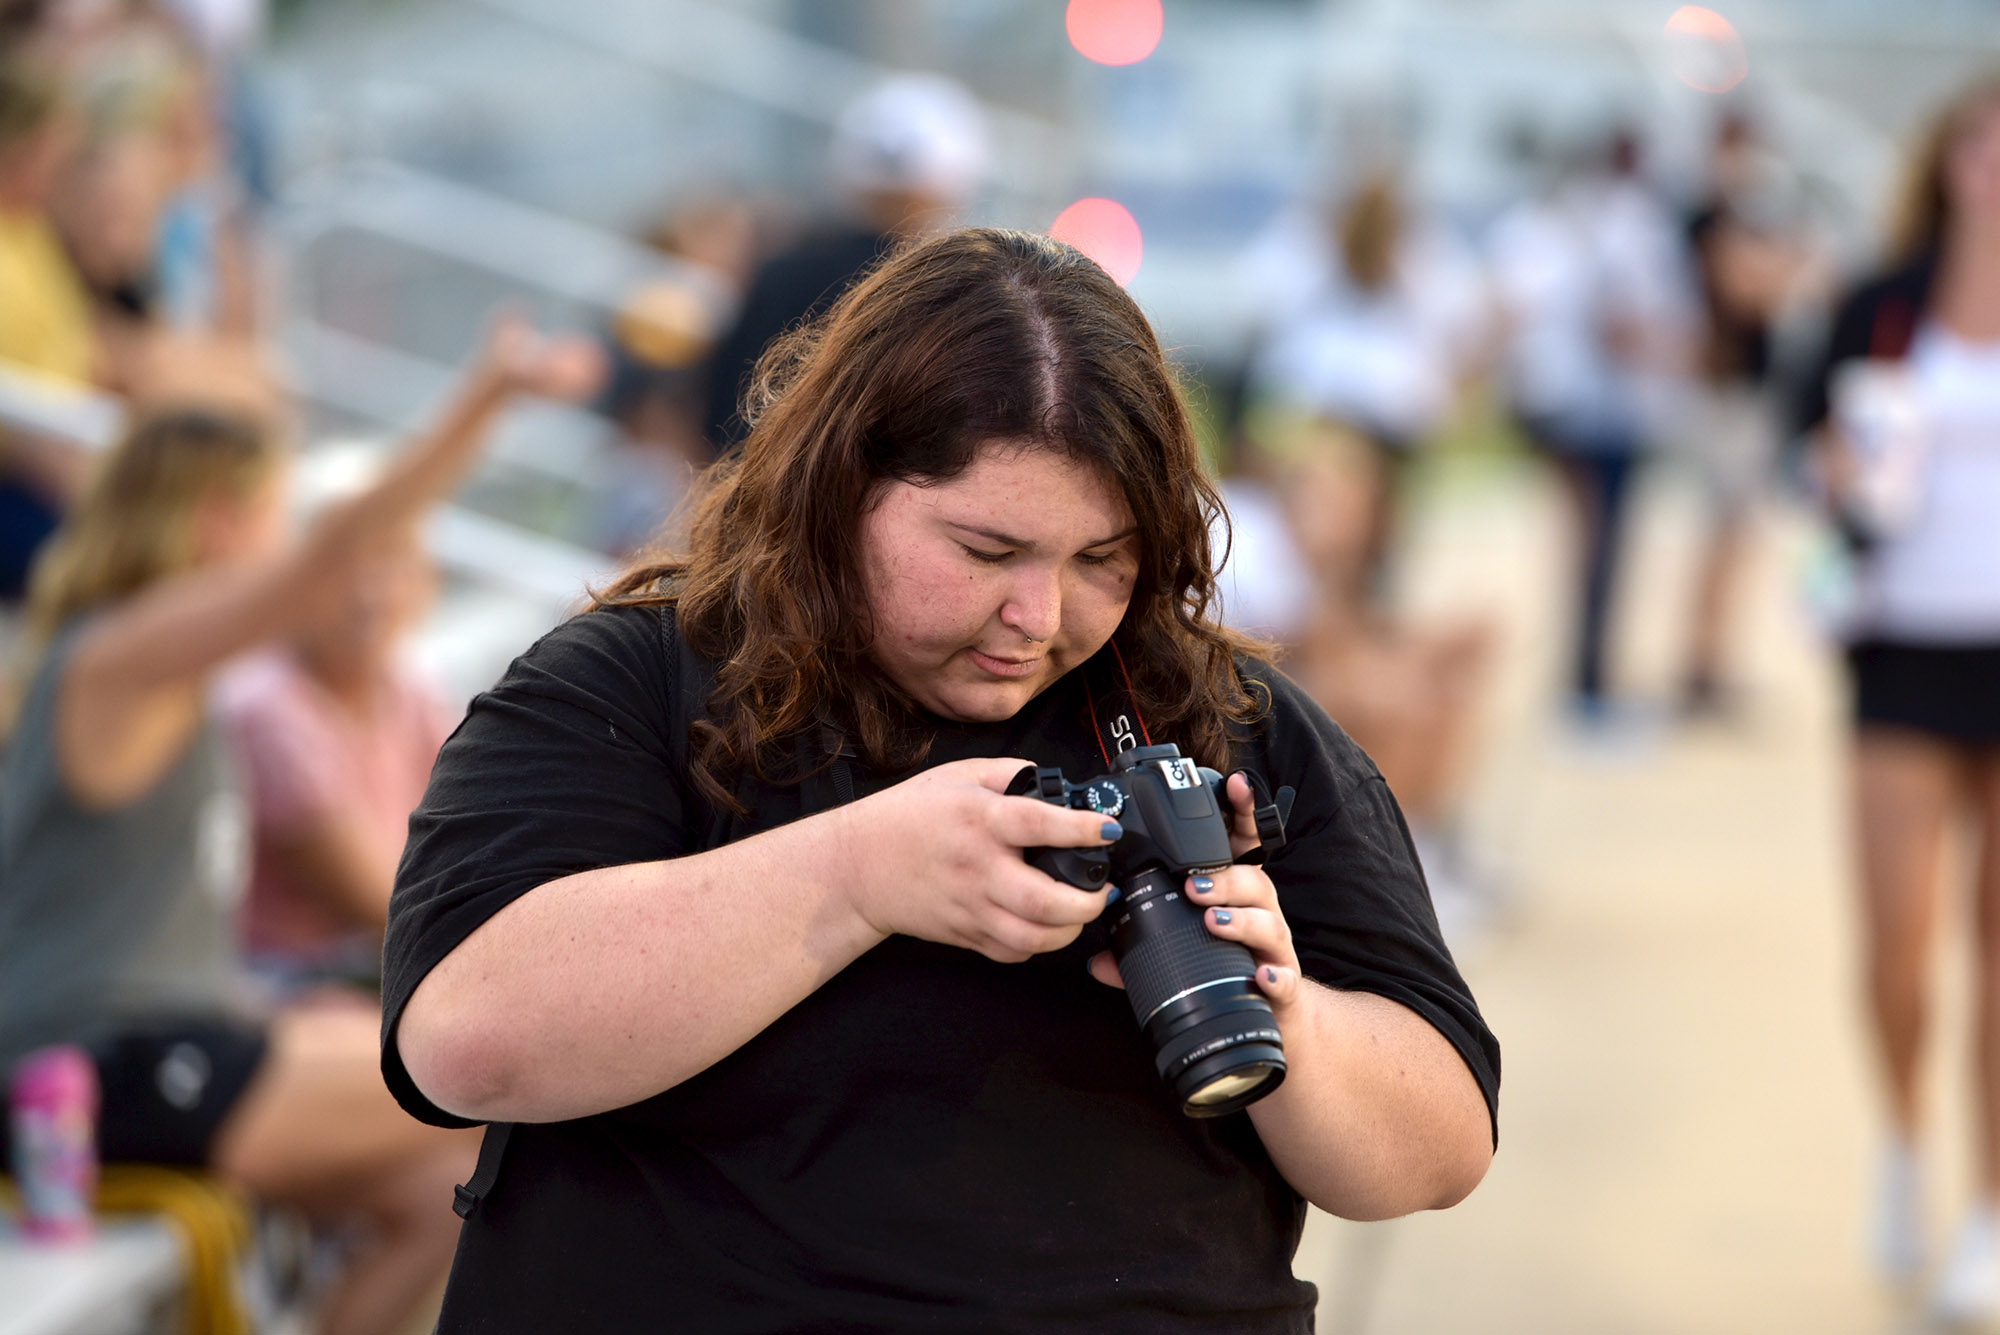 a student reviews photos during a football game